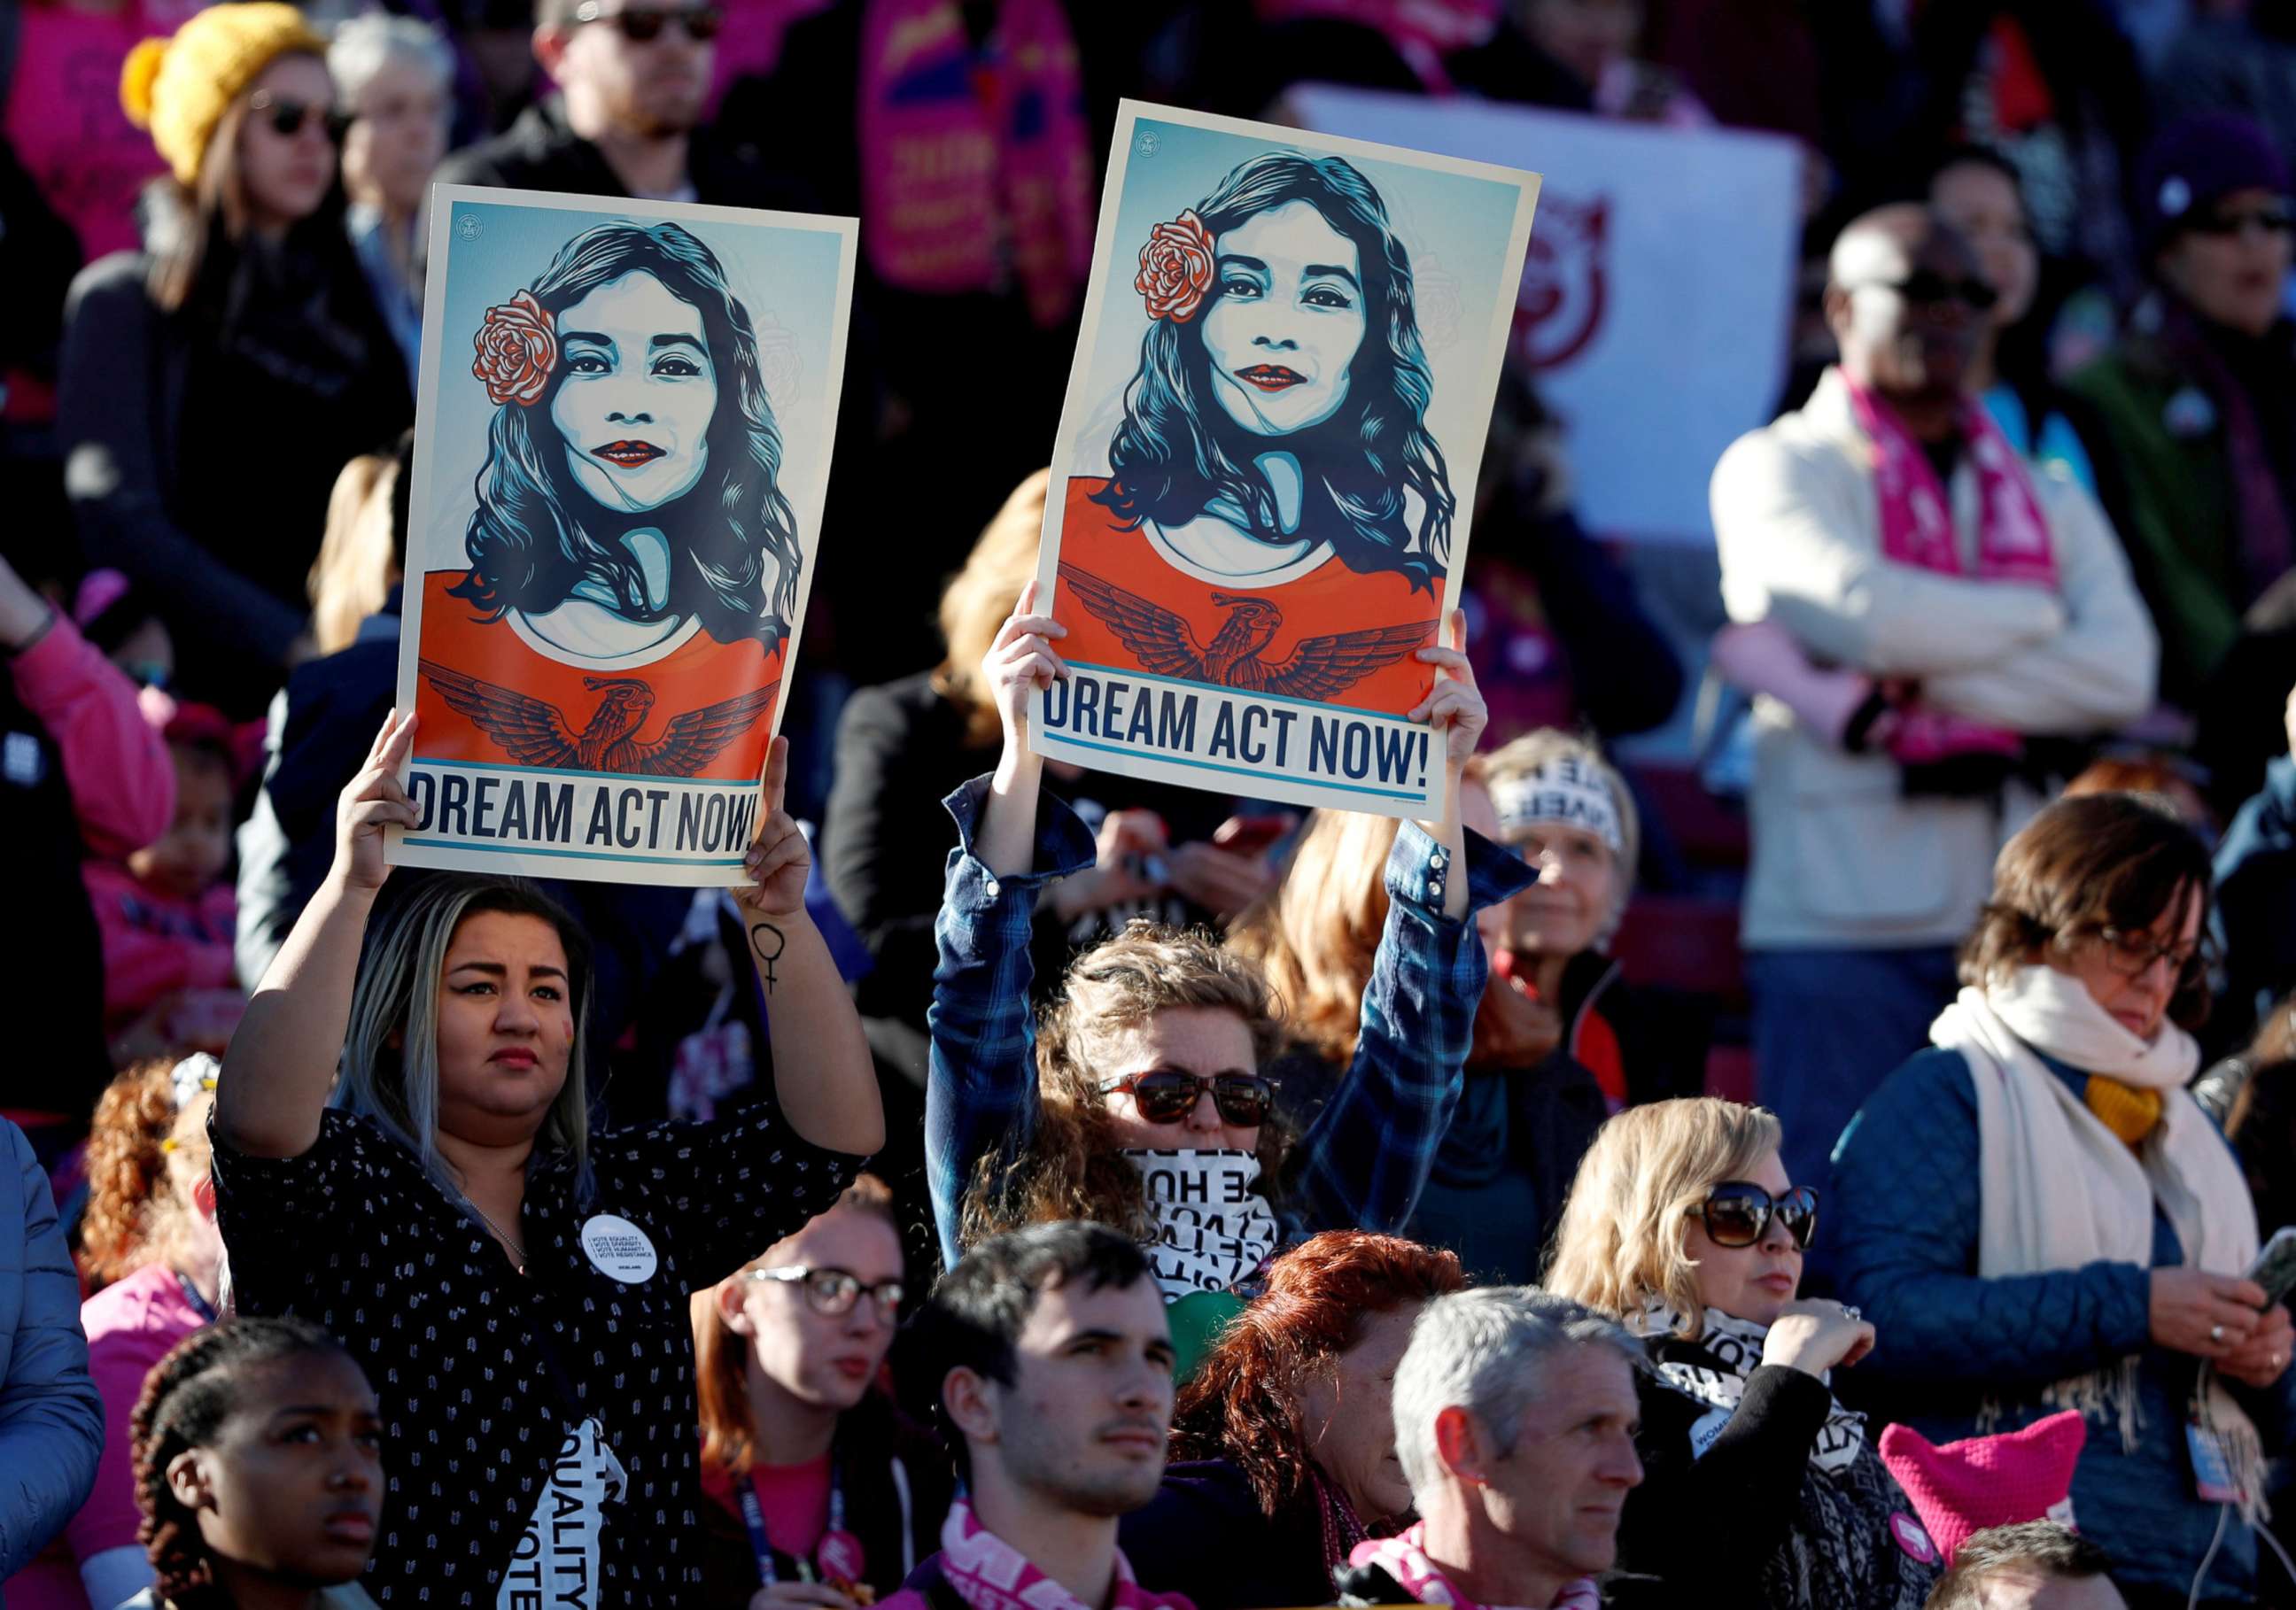 PHOTO: Supporters of Deferred Action for Childhood Arrivals hold signs during the Women's March rally in Las Vegas, Jan. 21, 2018.